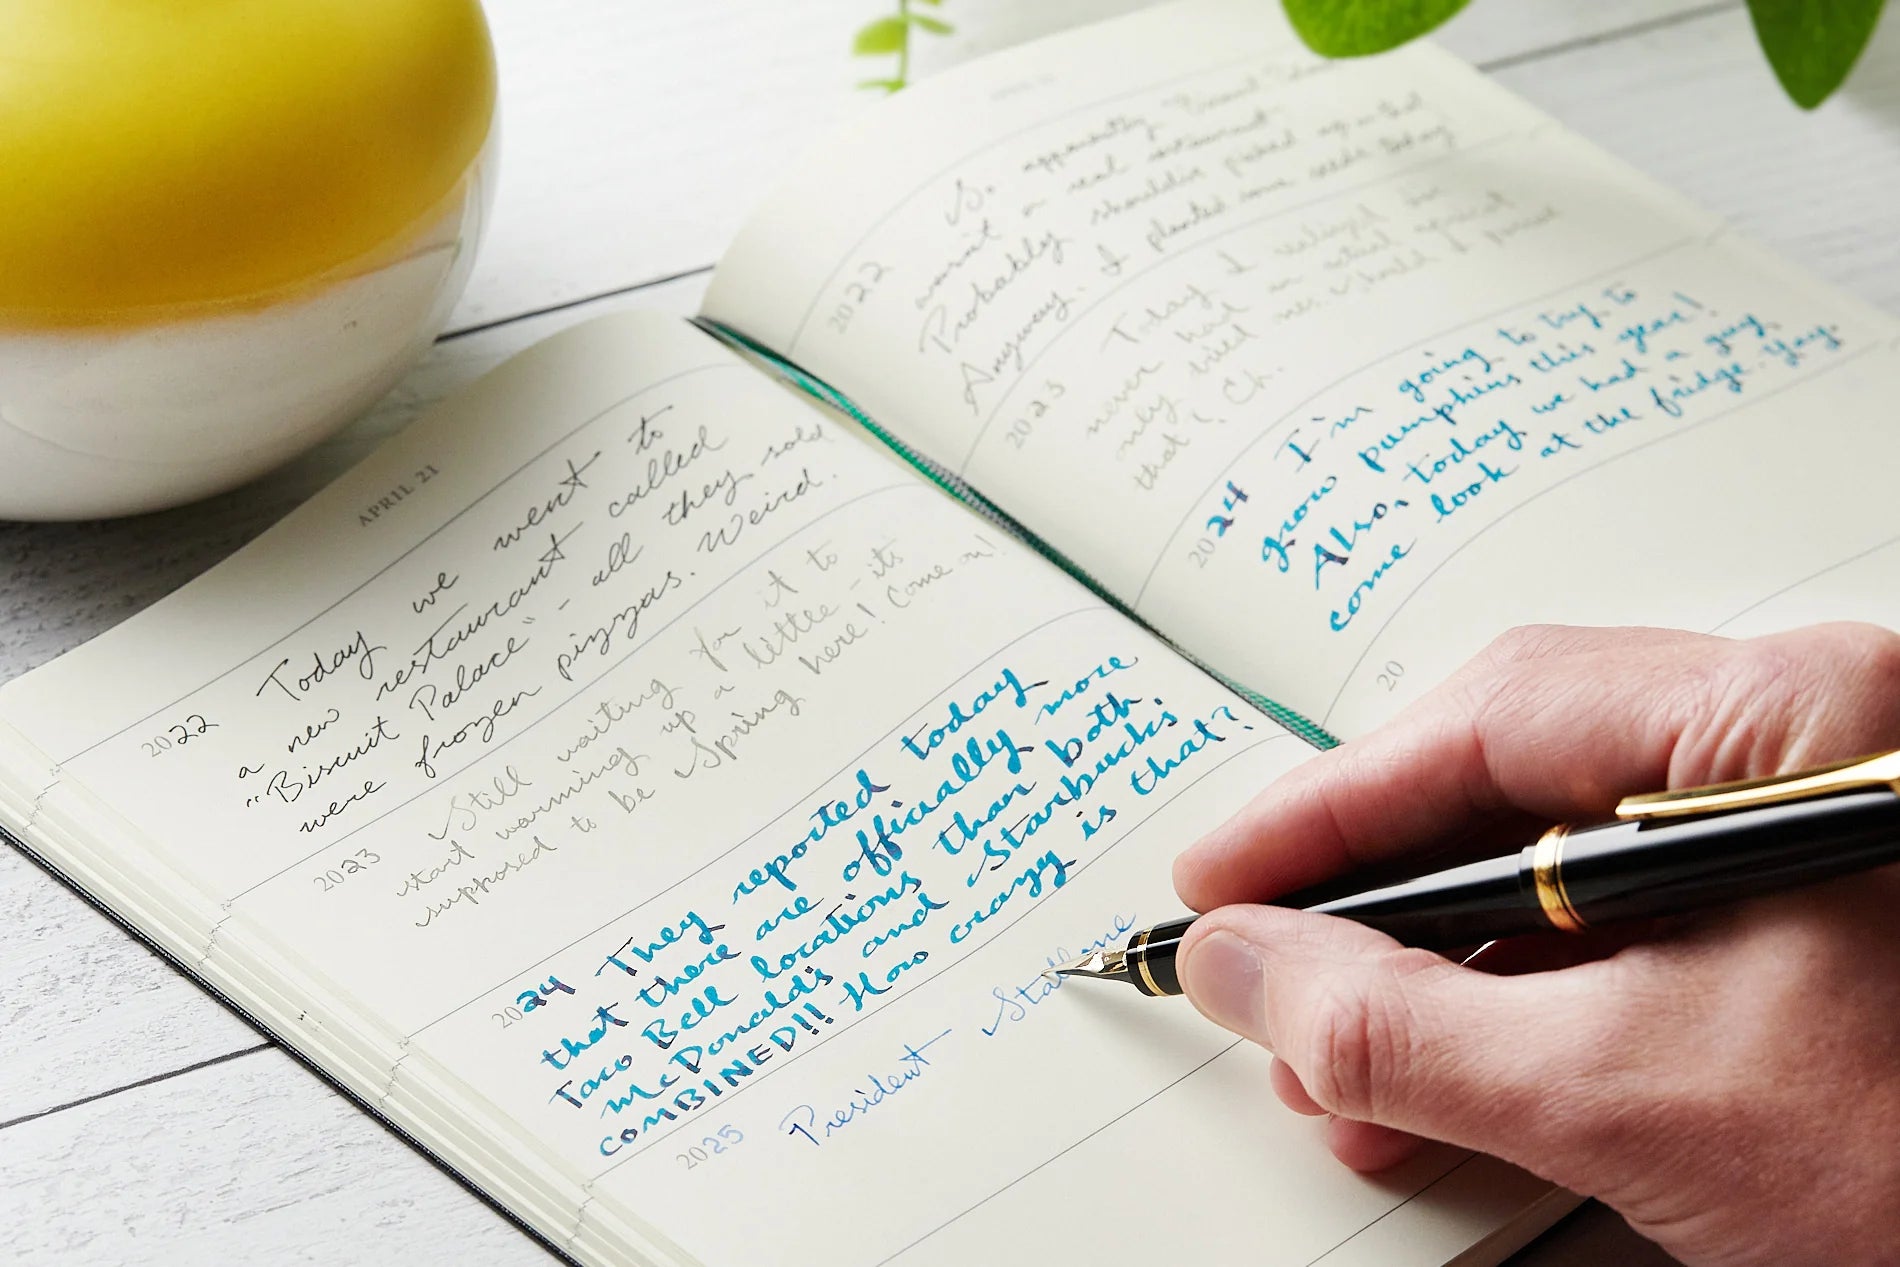 Tips For Starting an Ink Journal - The Goulet Pen Company